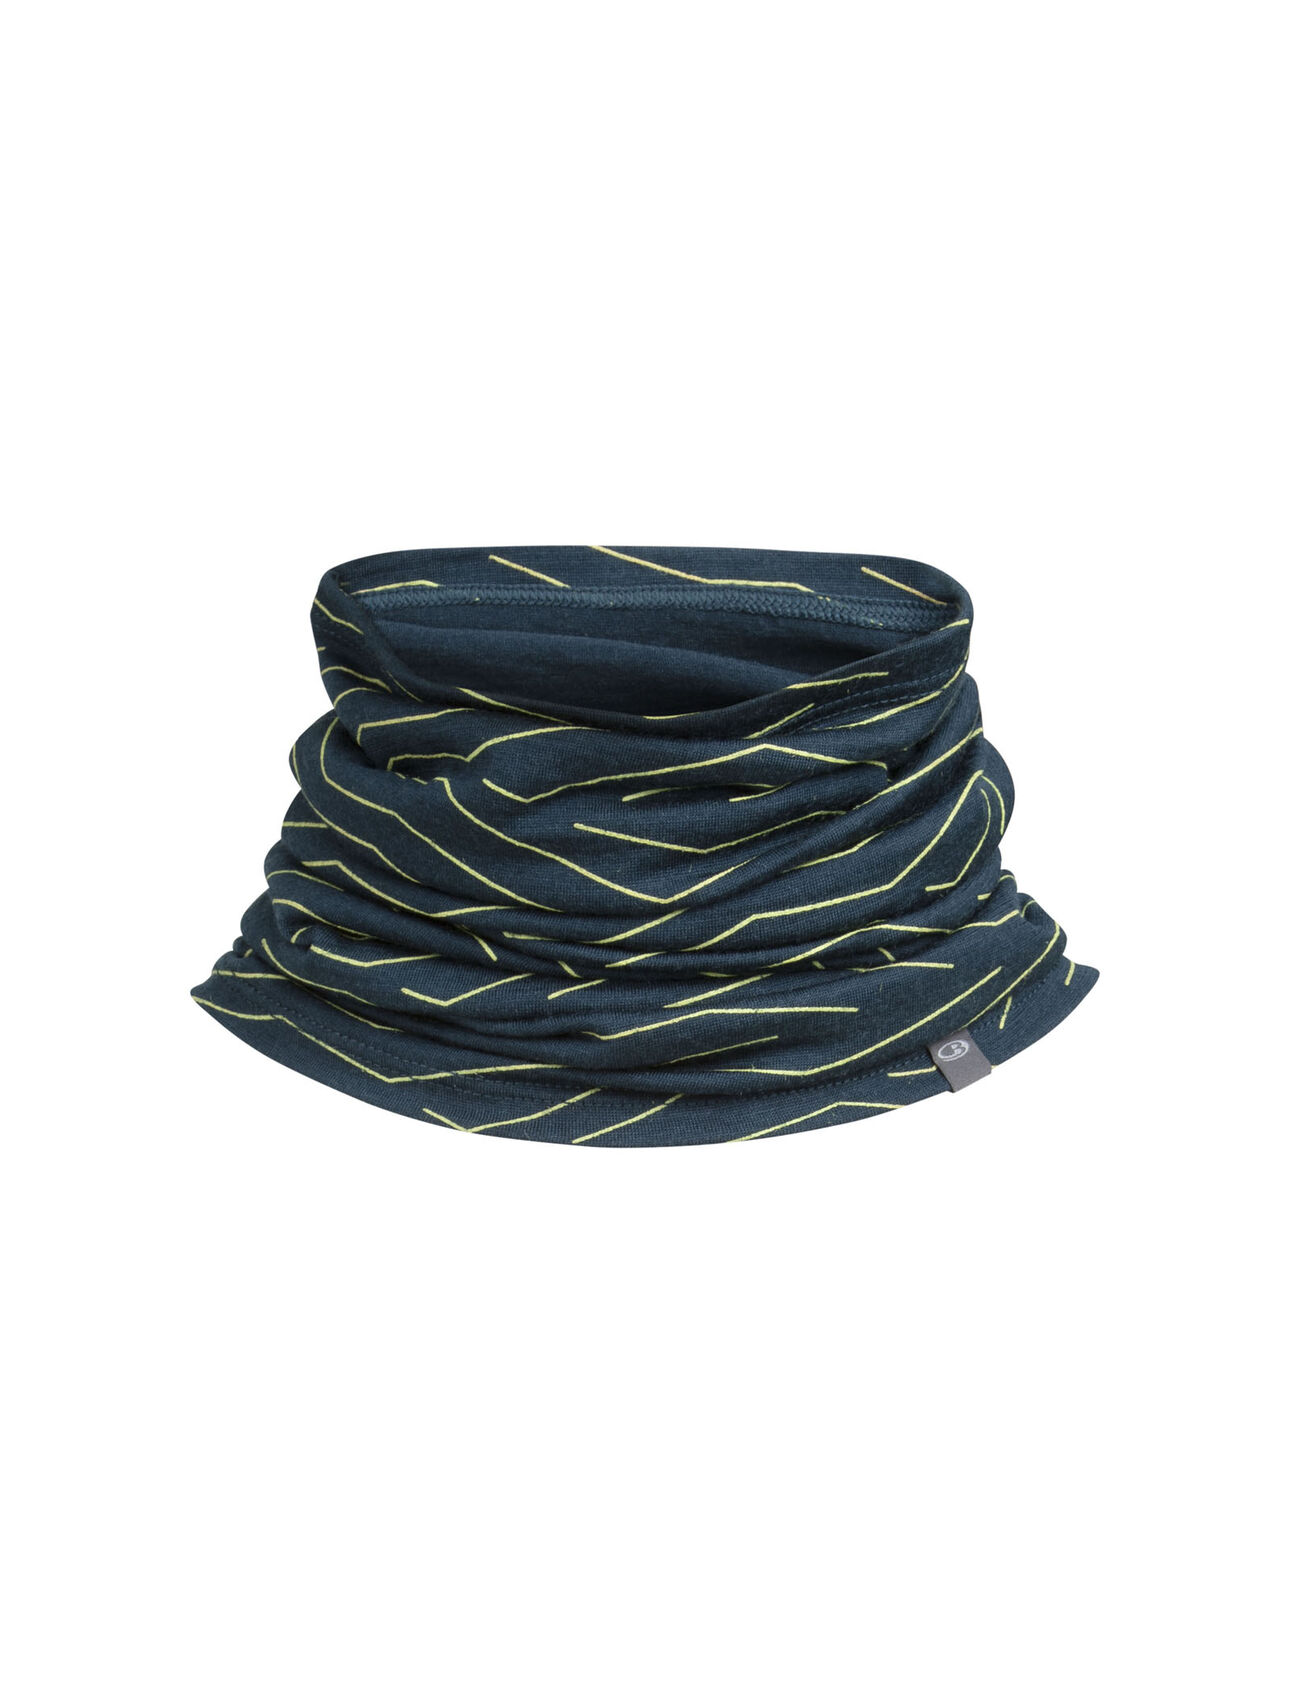 Unisex Merino Flexi Chute Napasoq Lines  Ultra-versatile headwear that functions as a beanie, headband, facemask, or neck gaiter, our Flexi Chute Napasoq Lines features 100% merino wool jersey for natural softness, breathability, and odor resistance.